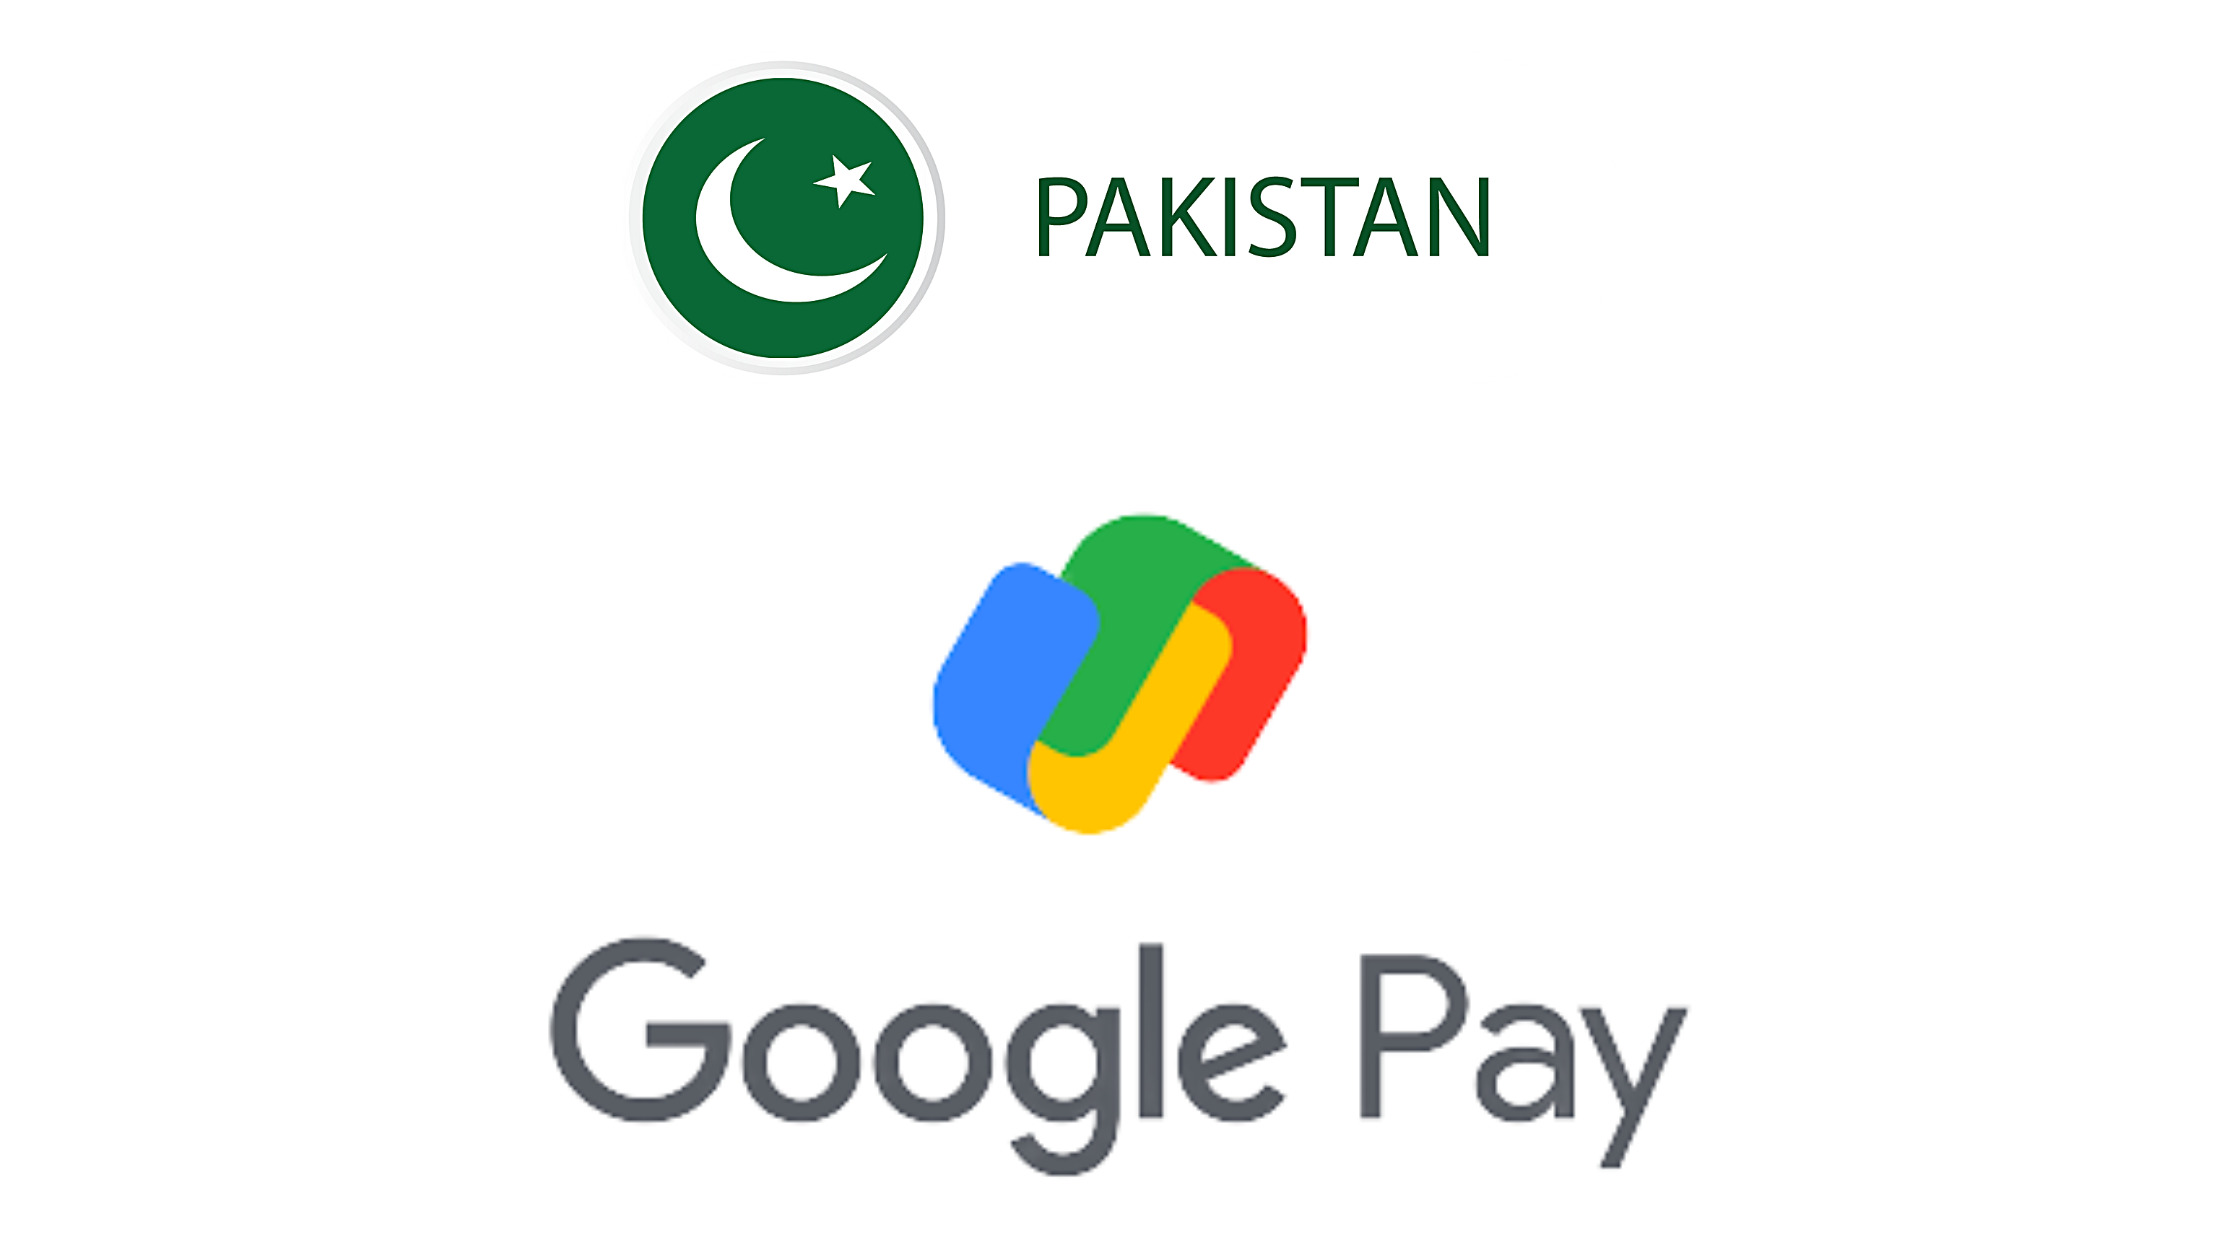 Is Google Pay Available in Pakistan?